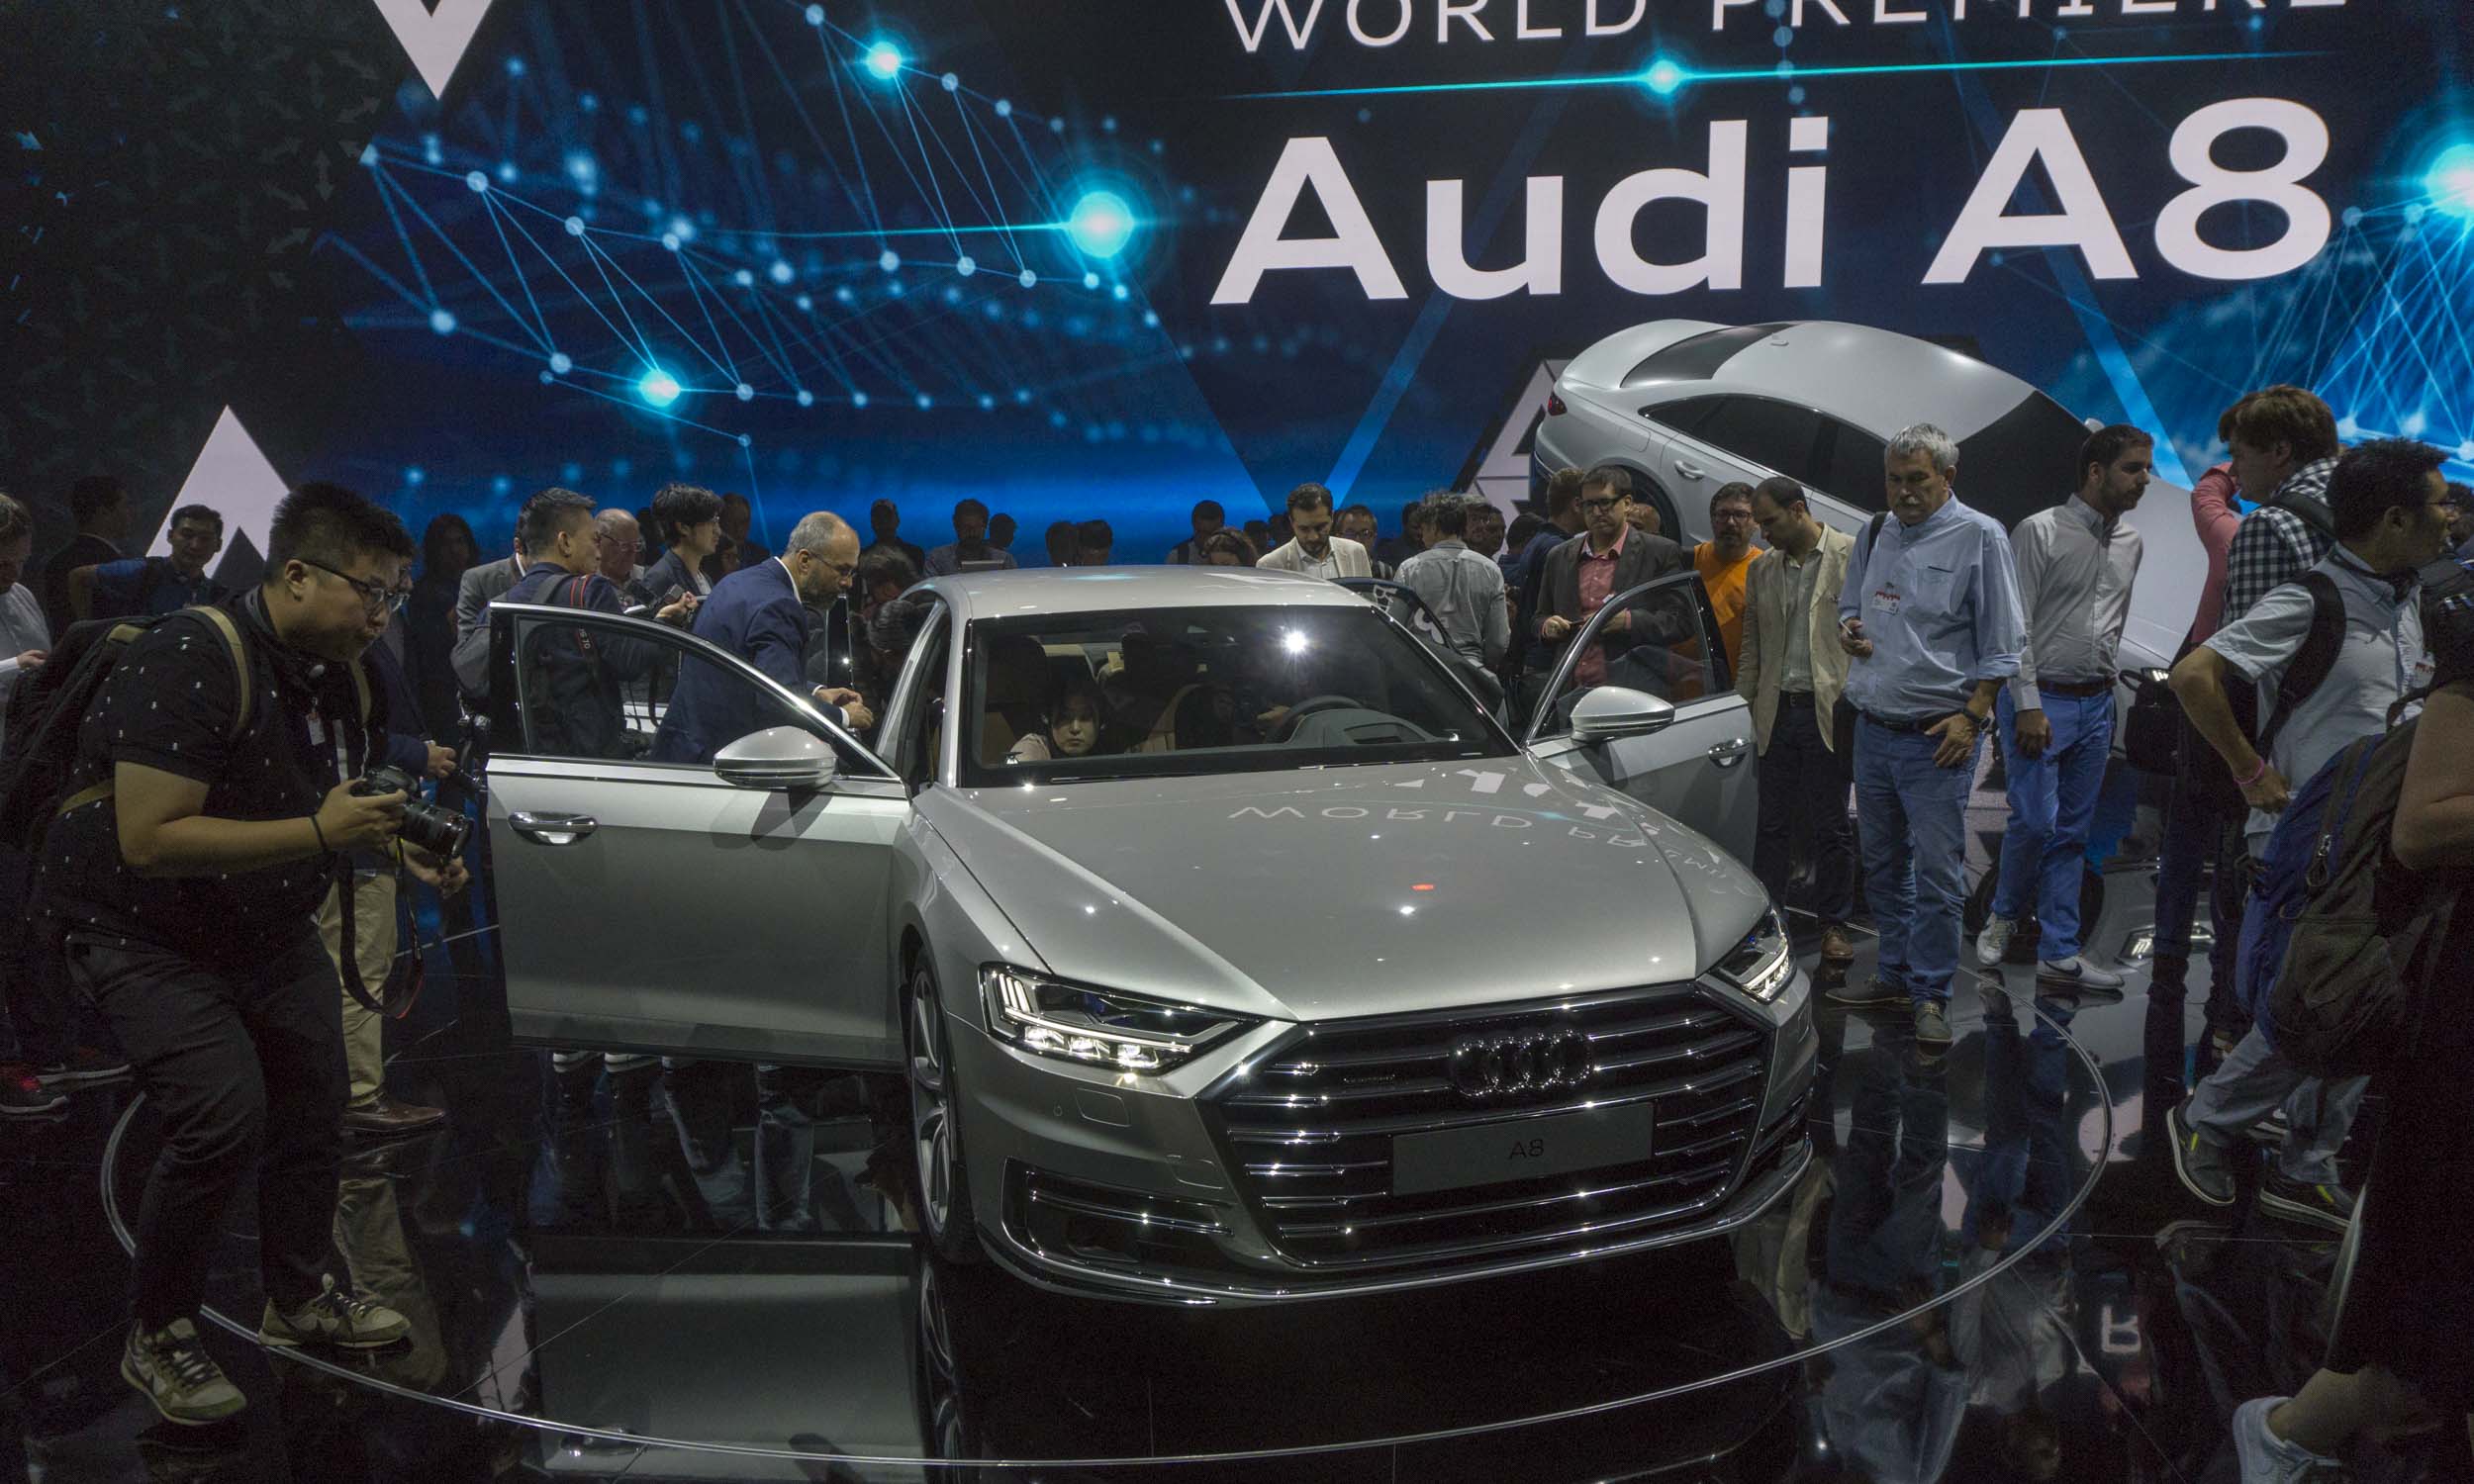 2019 Audi A8: First Look